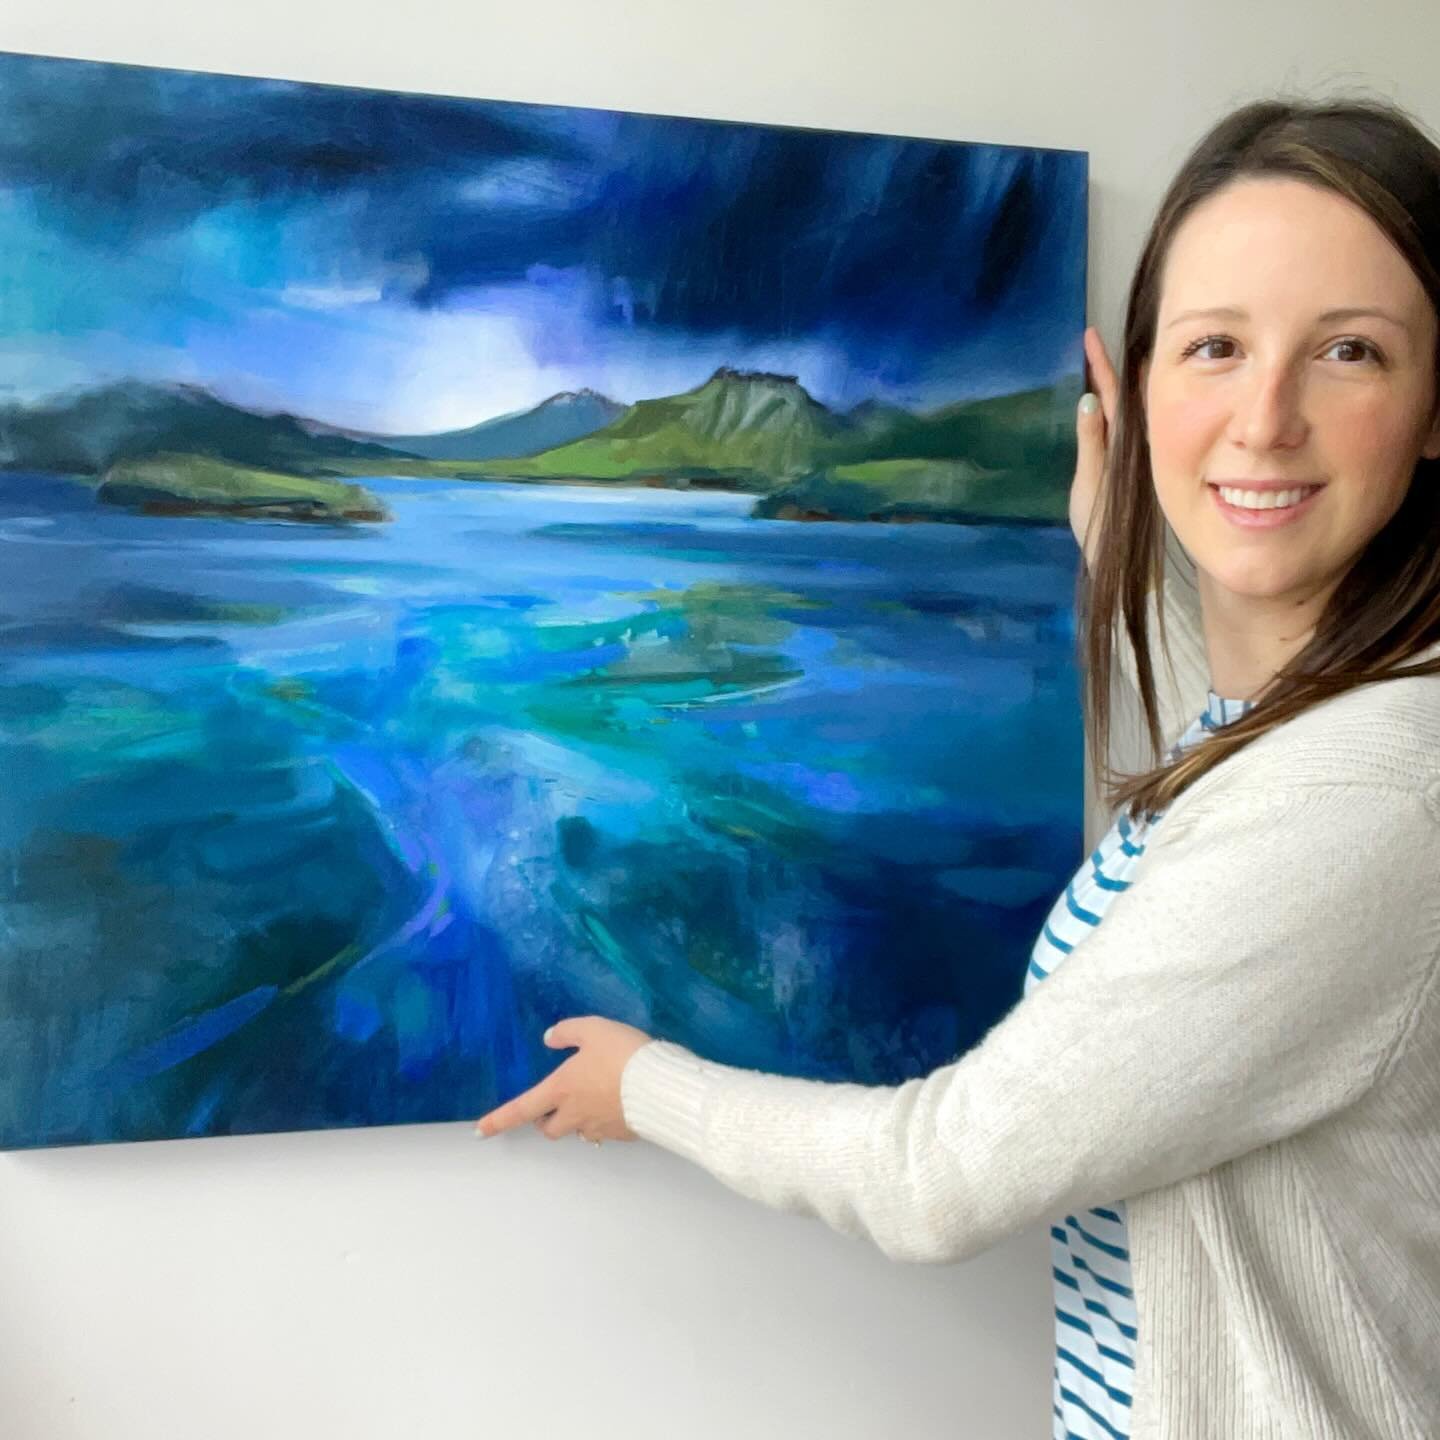 Coastlines of Harris I, one of my favourites from my new collection of paintings. Sailing round these coastlines gave me a whole new perspective of the land from the sea, with constantly moving water and weather systems between us. I loved the challe